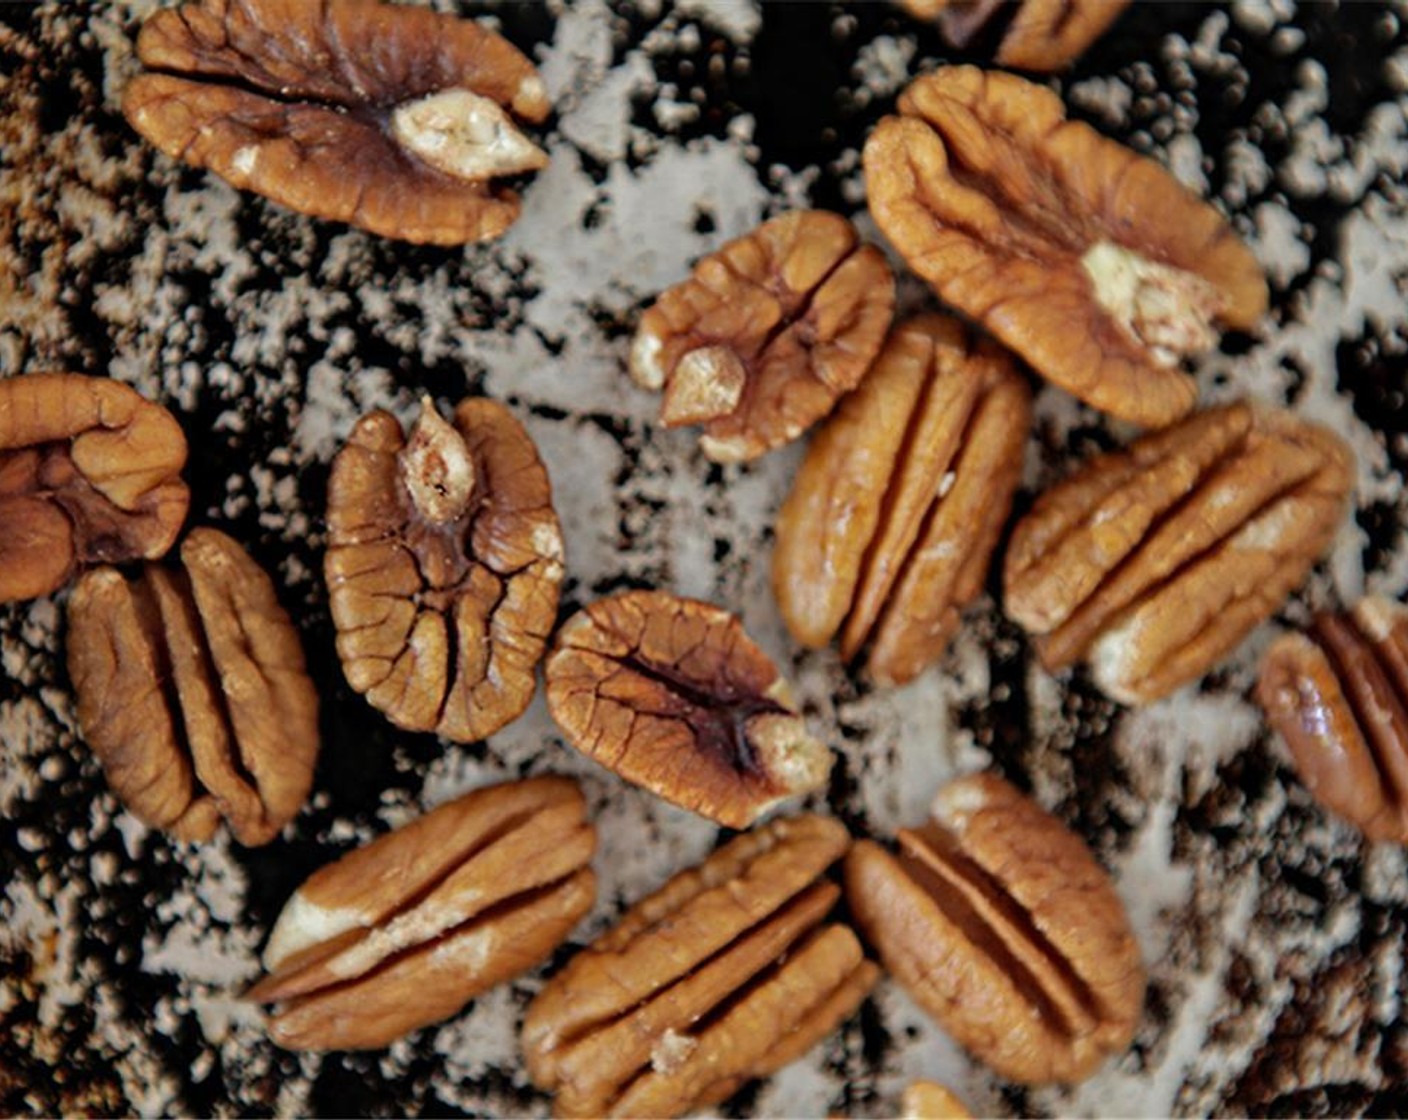 step 5 Place Pecans (1/4 cup) on the roasting pan used for the mushrooms and place in the oven for 6-8 min or until lightly toasted. Remove from oven and set aside.